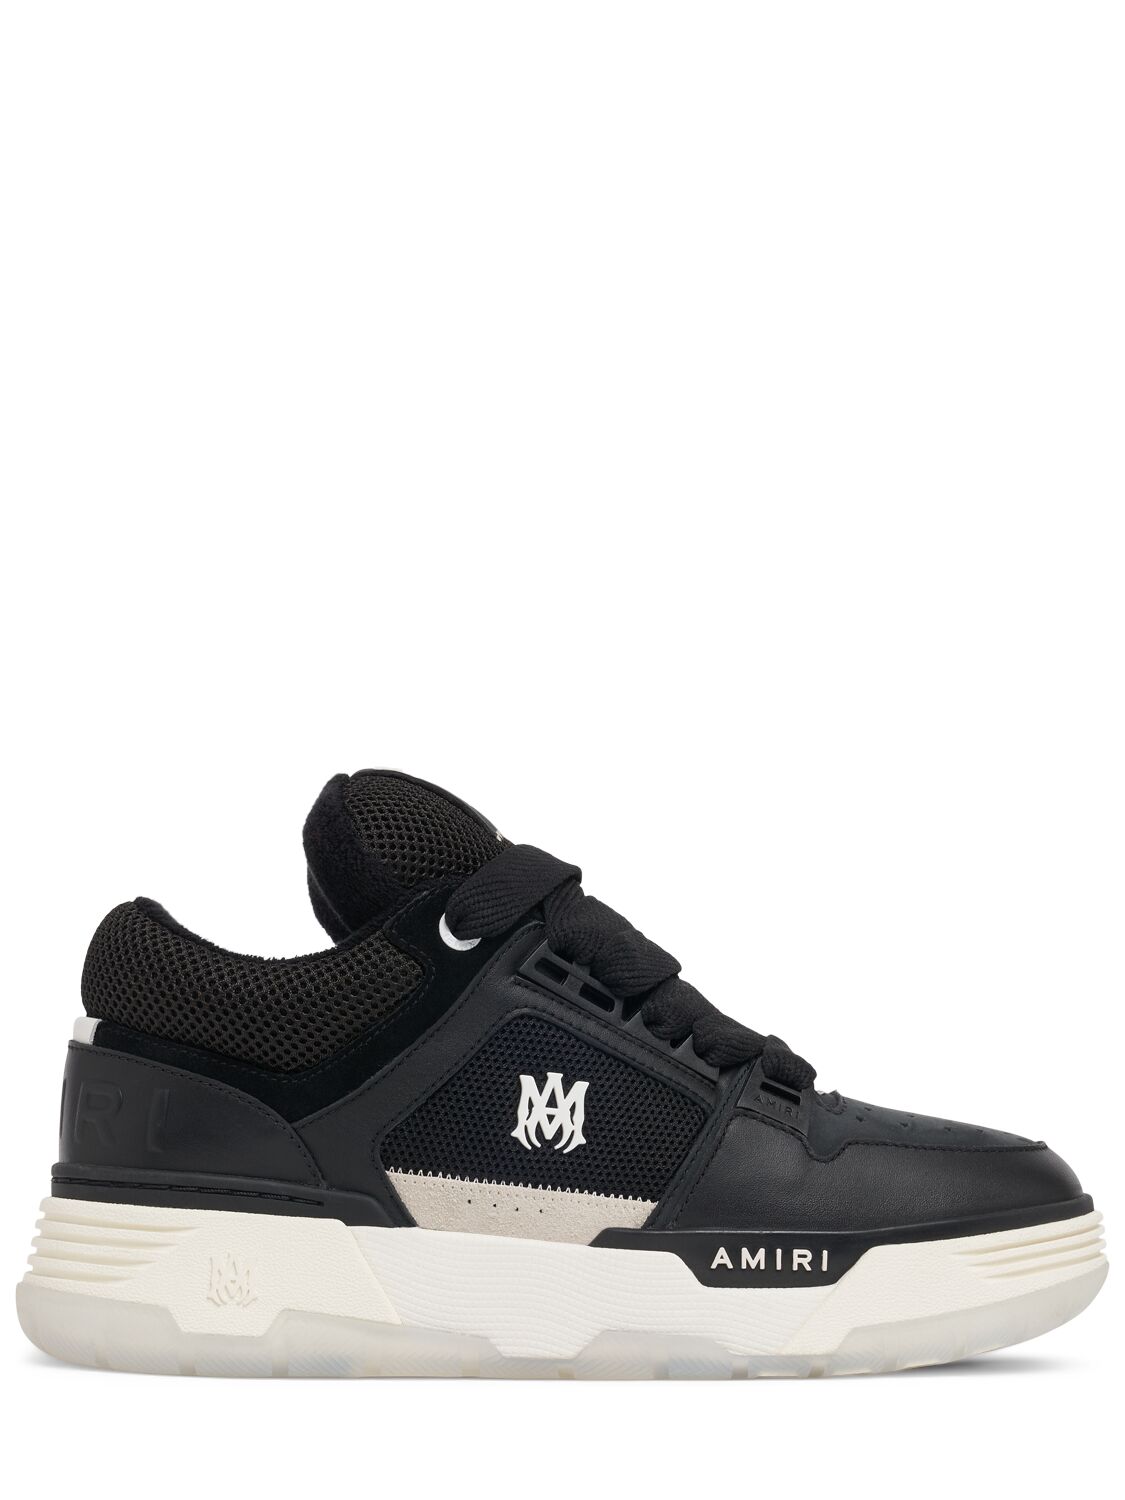 Amiri Ma-1 Leather Low Top Trainers In Black/white